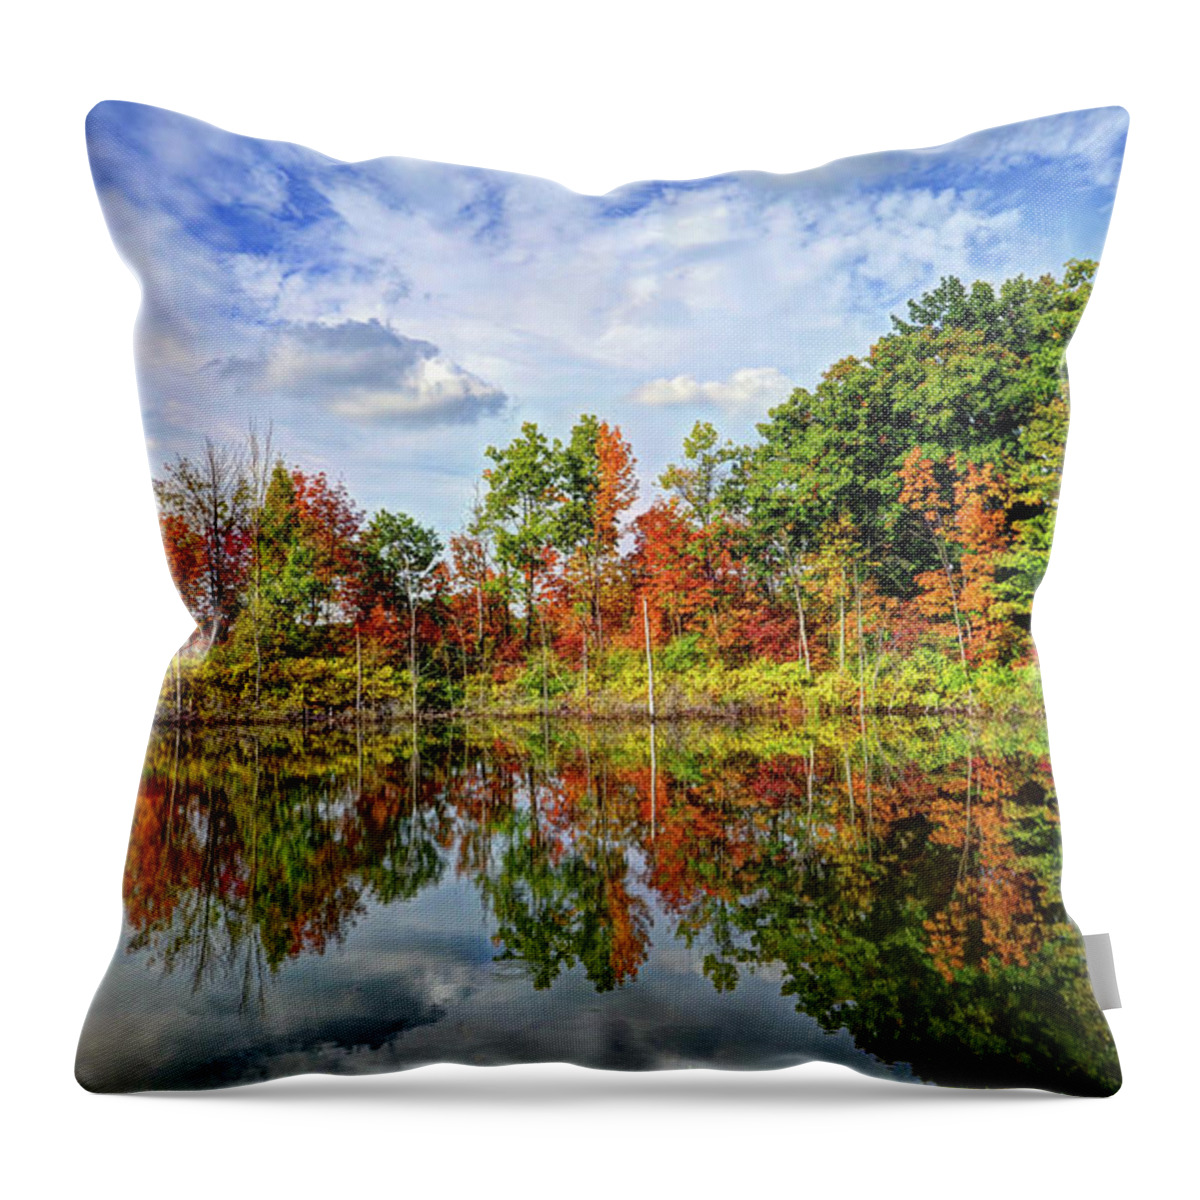 Fall Throw Pillow featuring the photograph Reflections by Rodney Campbell